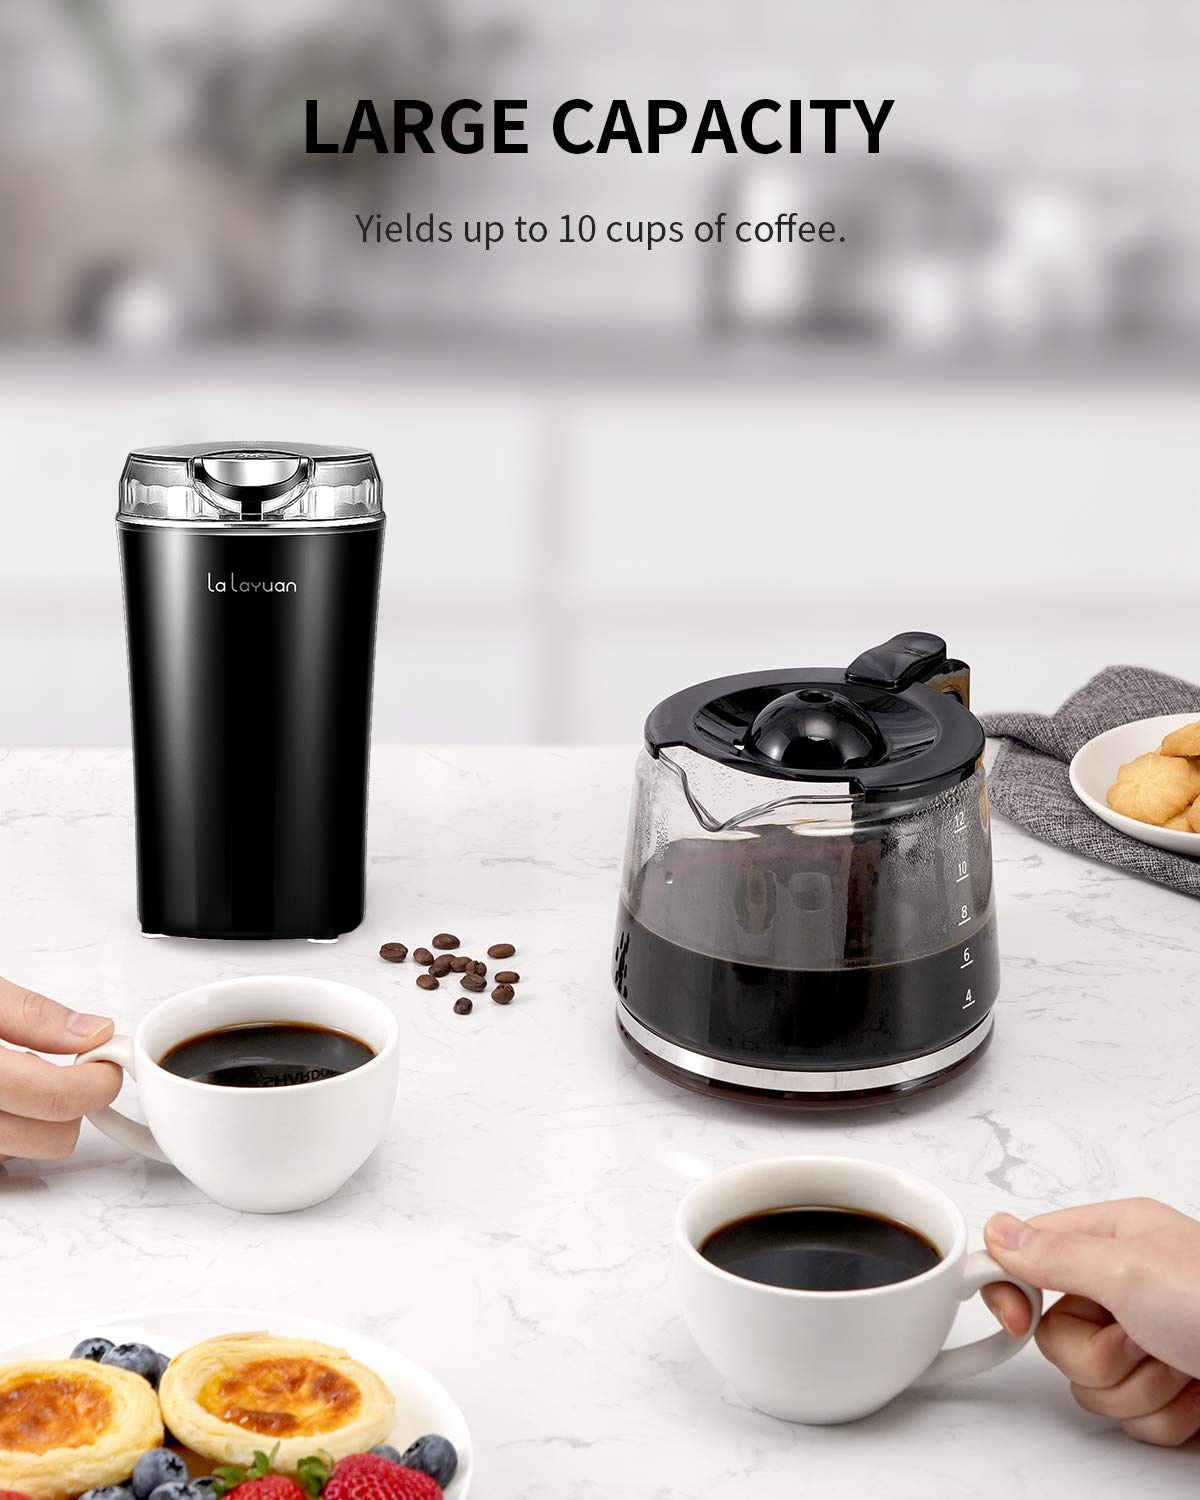 Huxychao Electric Coffee Grinder, Rechargeable Mini Coffee Grinder With  Multi Grind Setting, Coffee Bean Grinder Spice Grinder For Herbs, Nuts,  Spice